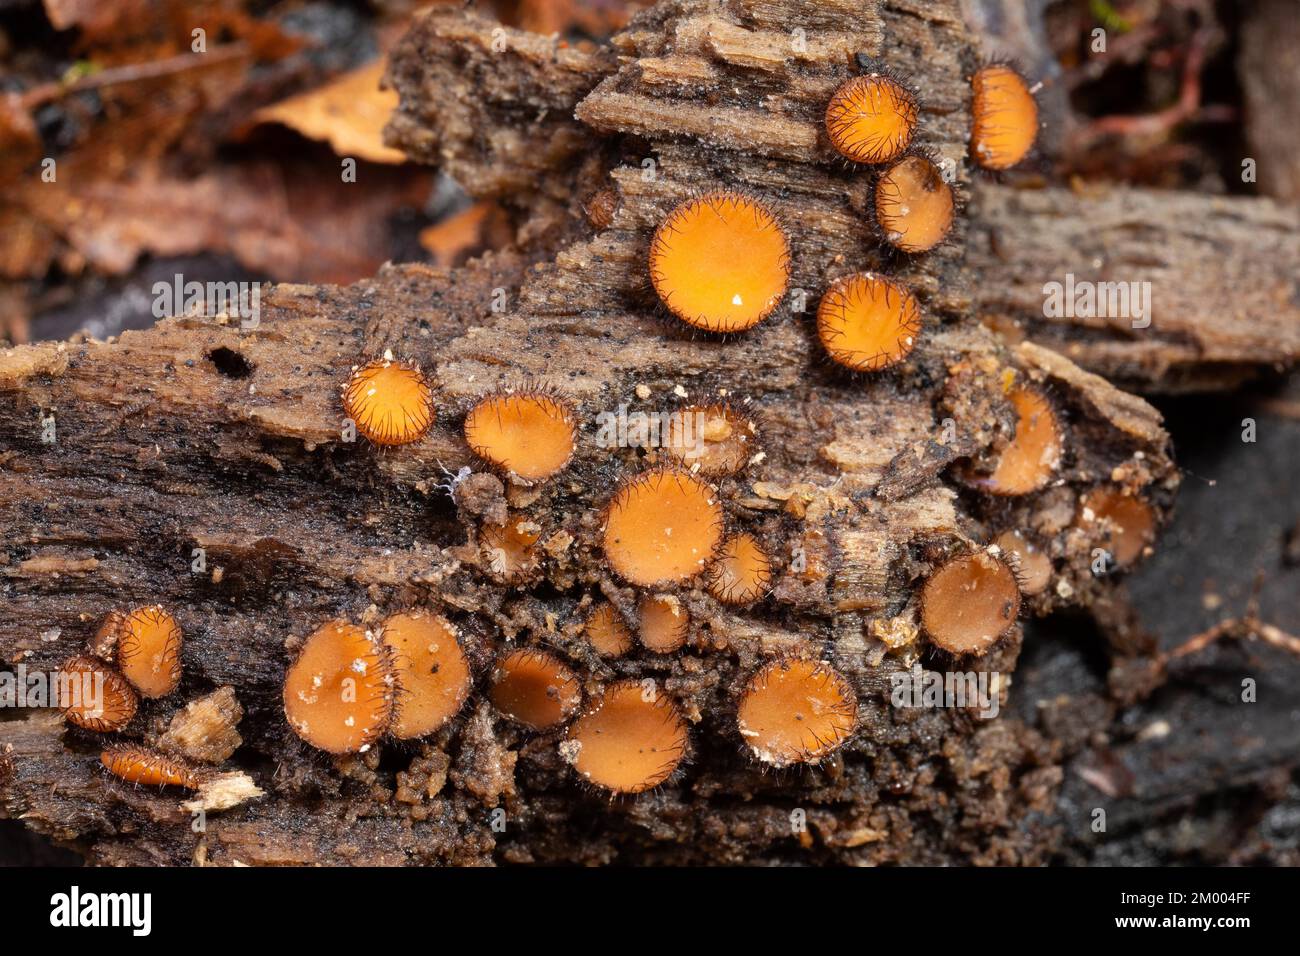 Scutellinia several bowl-shaped orange fruiting bodies with dark brown bristles at the edge on tree trunk Stock Photo